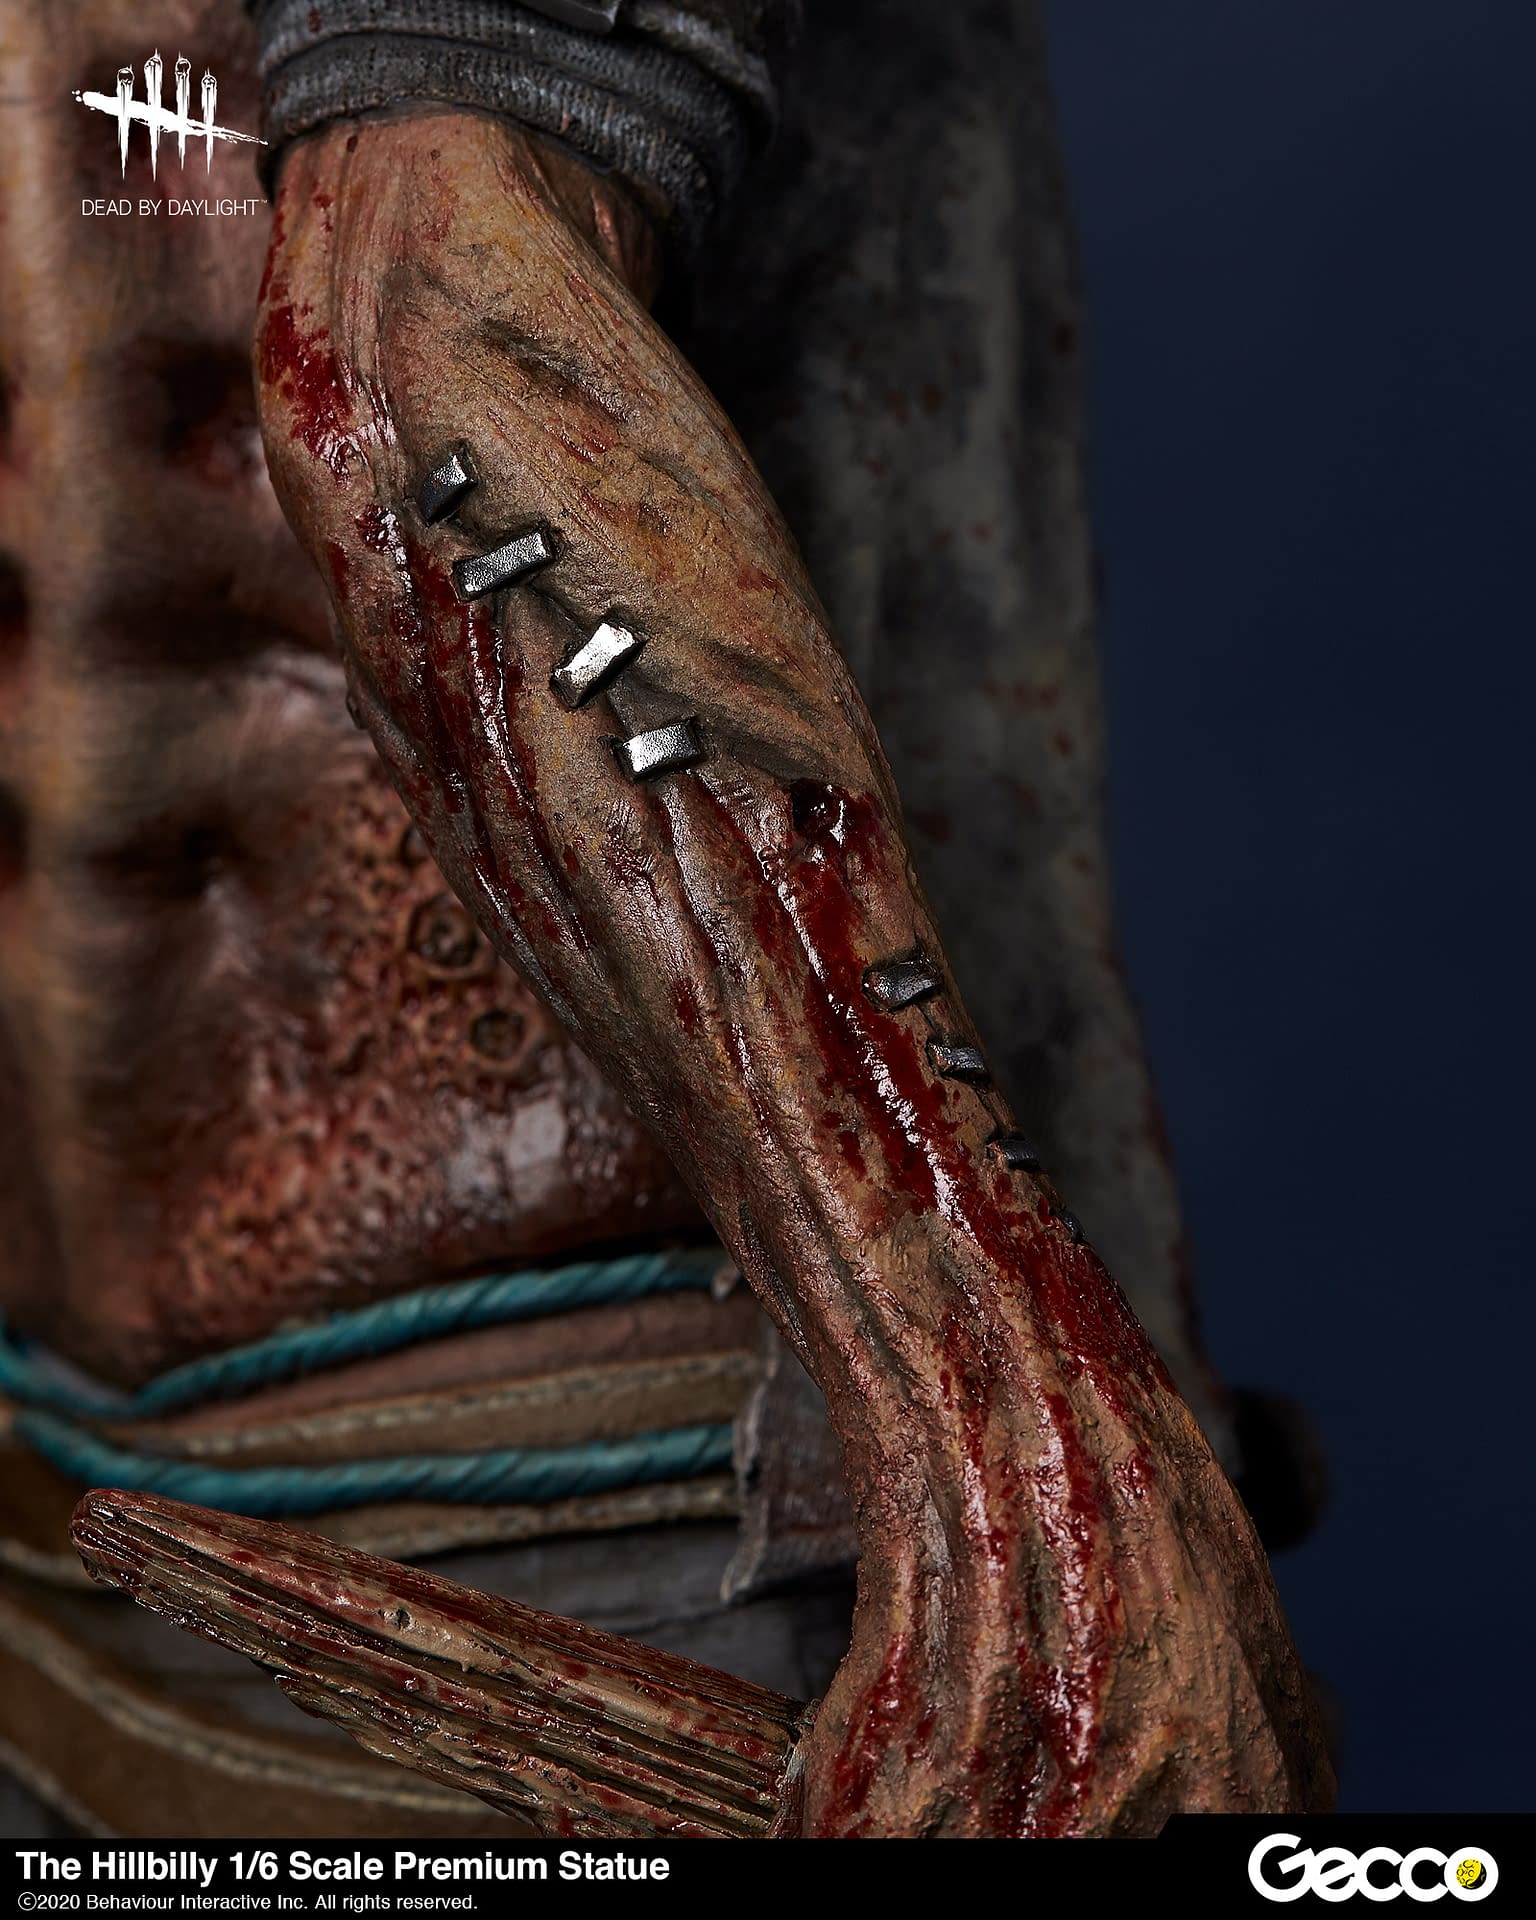 Gecco-Dead-by-Daylight-Hillbilly-Statue-014